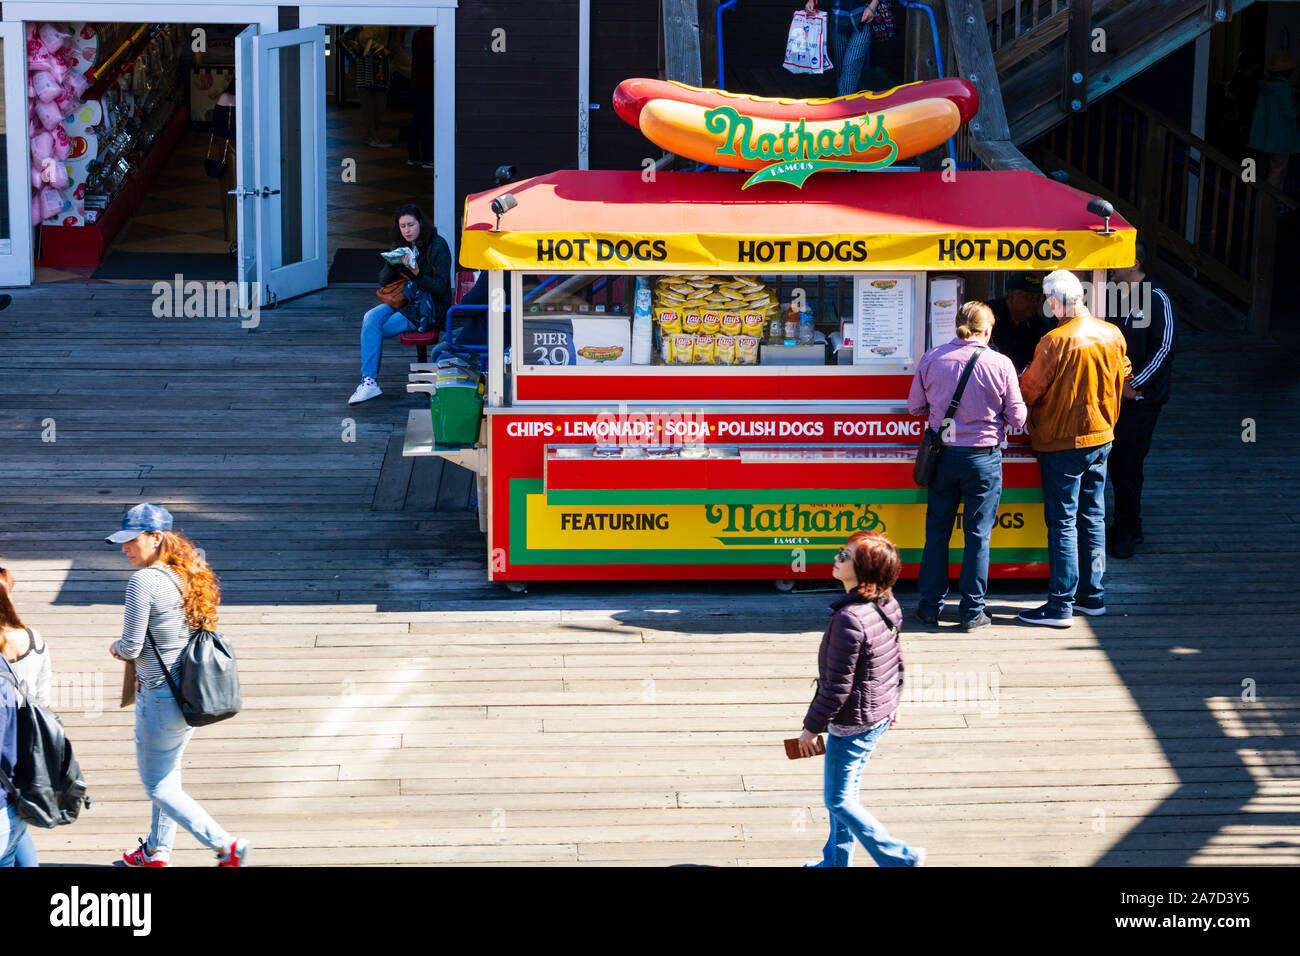 Hot dog stand on Pier 39, Fishermans wharf, San Francisco, California United States of America Stock Photo